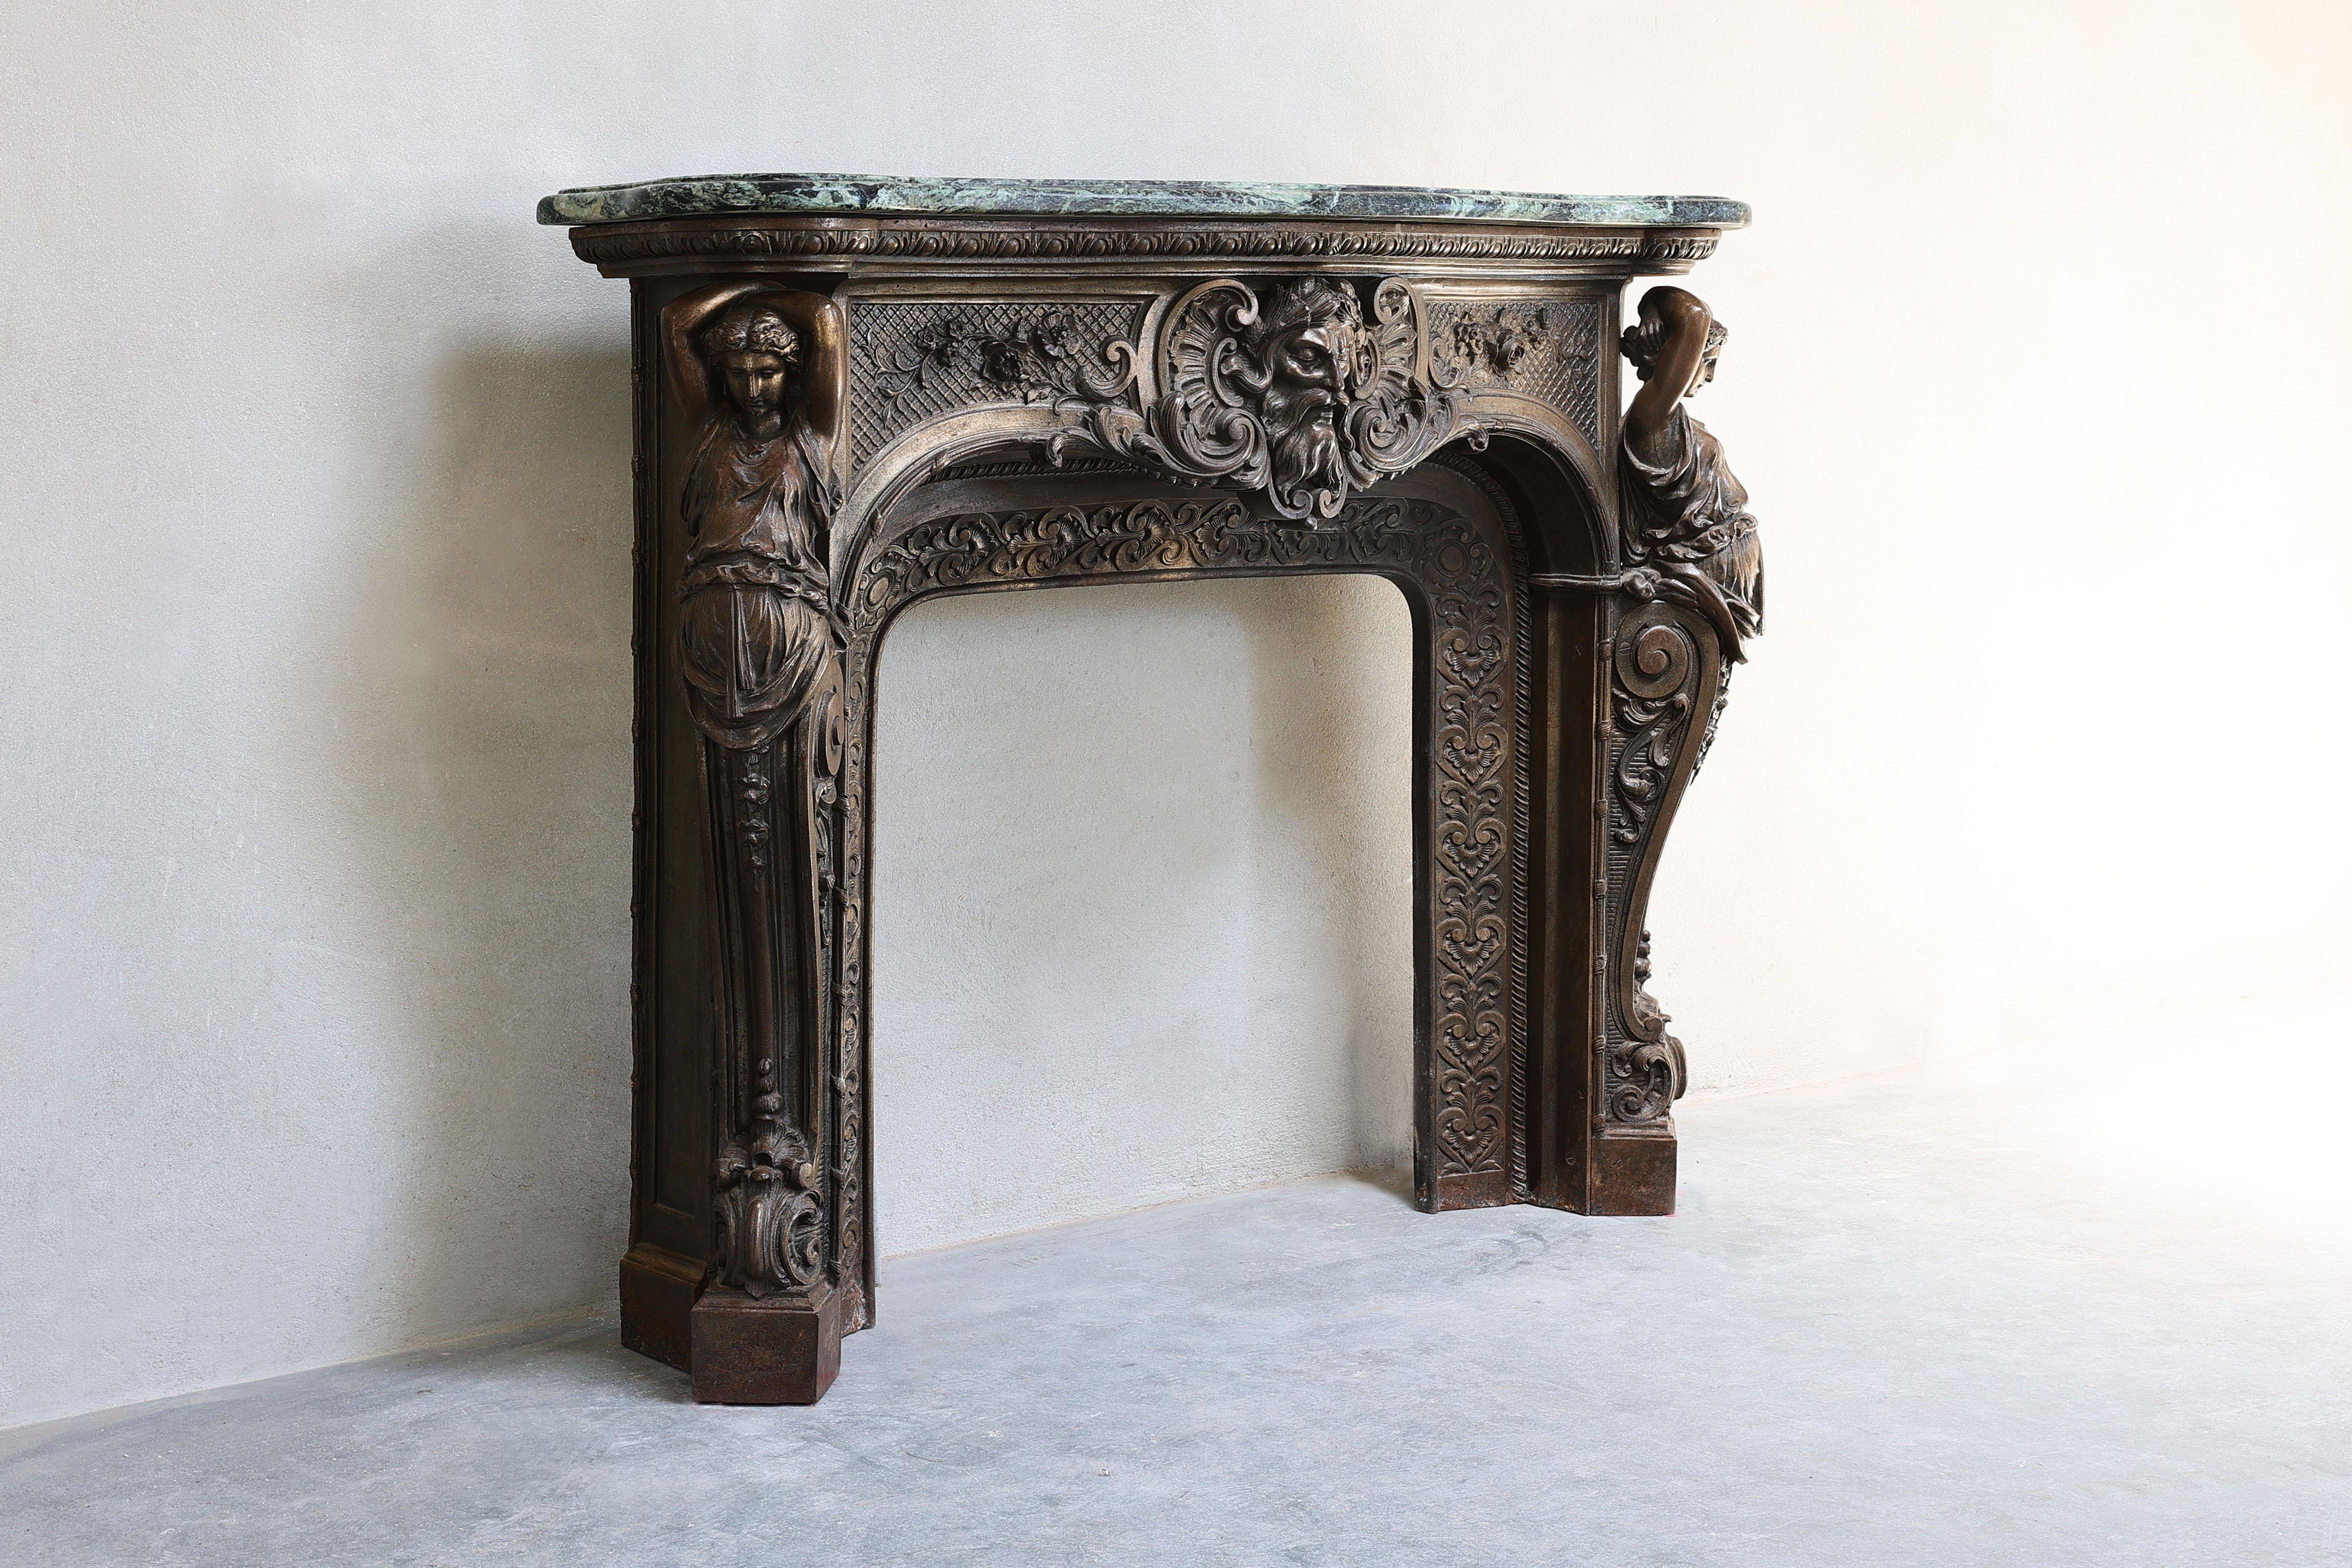 Very unique and rare antique marble fireplace of cast iron bronze patina and Vert de Gréce marble (Tinos) from the mid-19th century fireplace! The faces come from Greek mythology. In the center you see Poseidon, the God of the Sea and the statues on